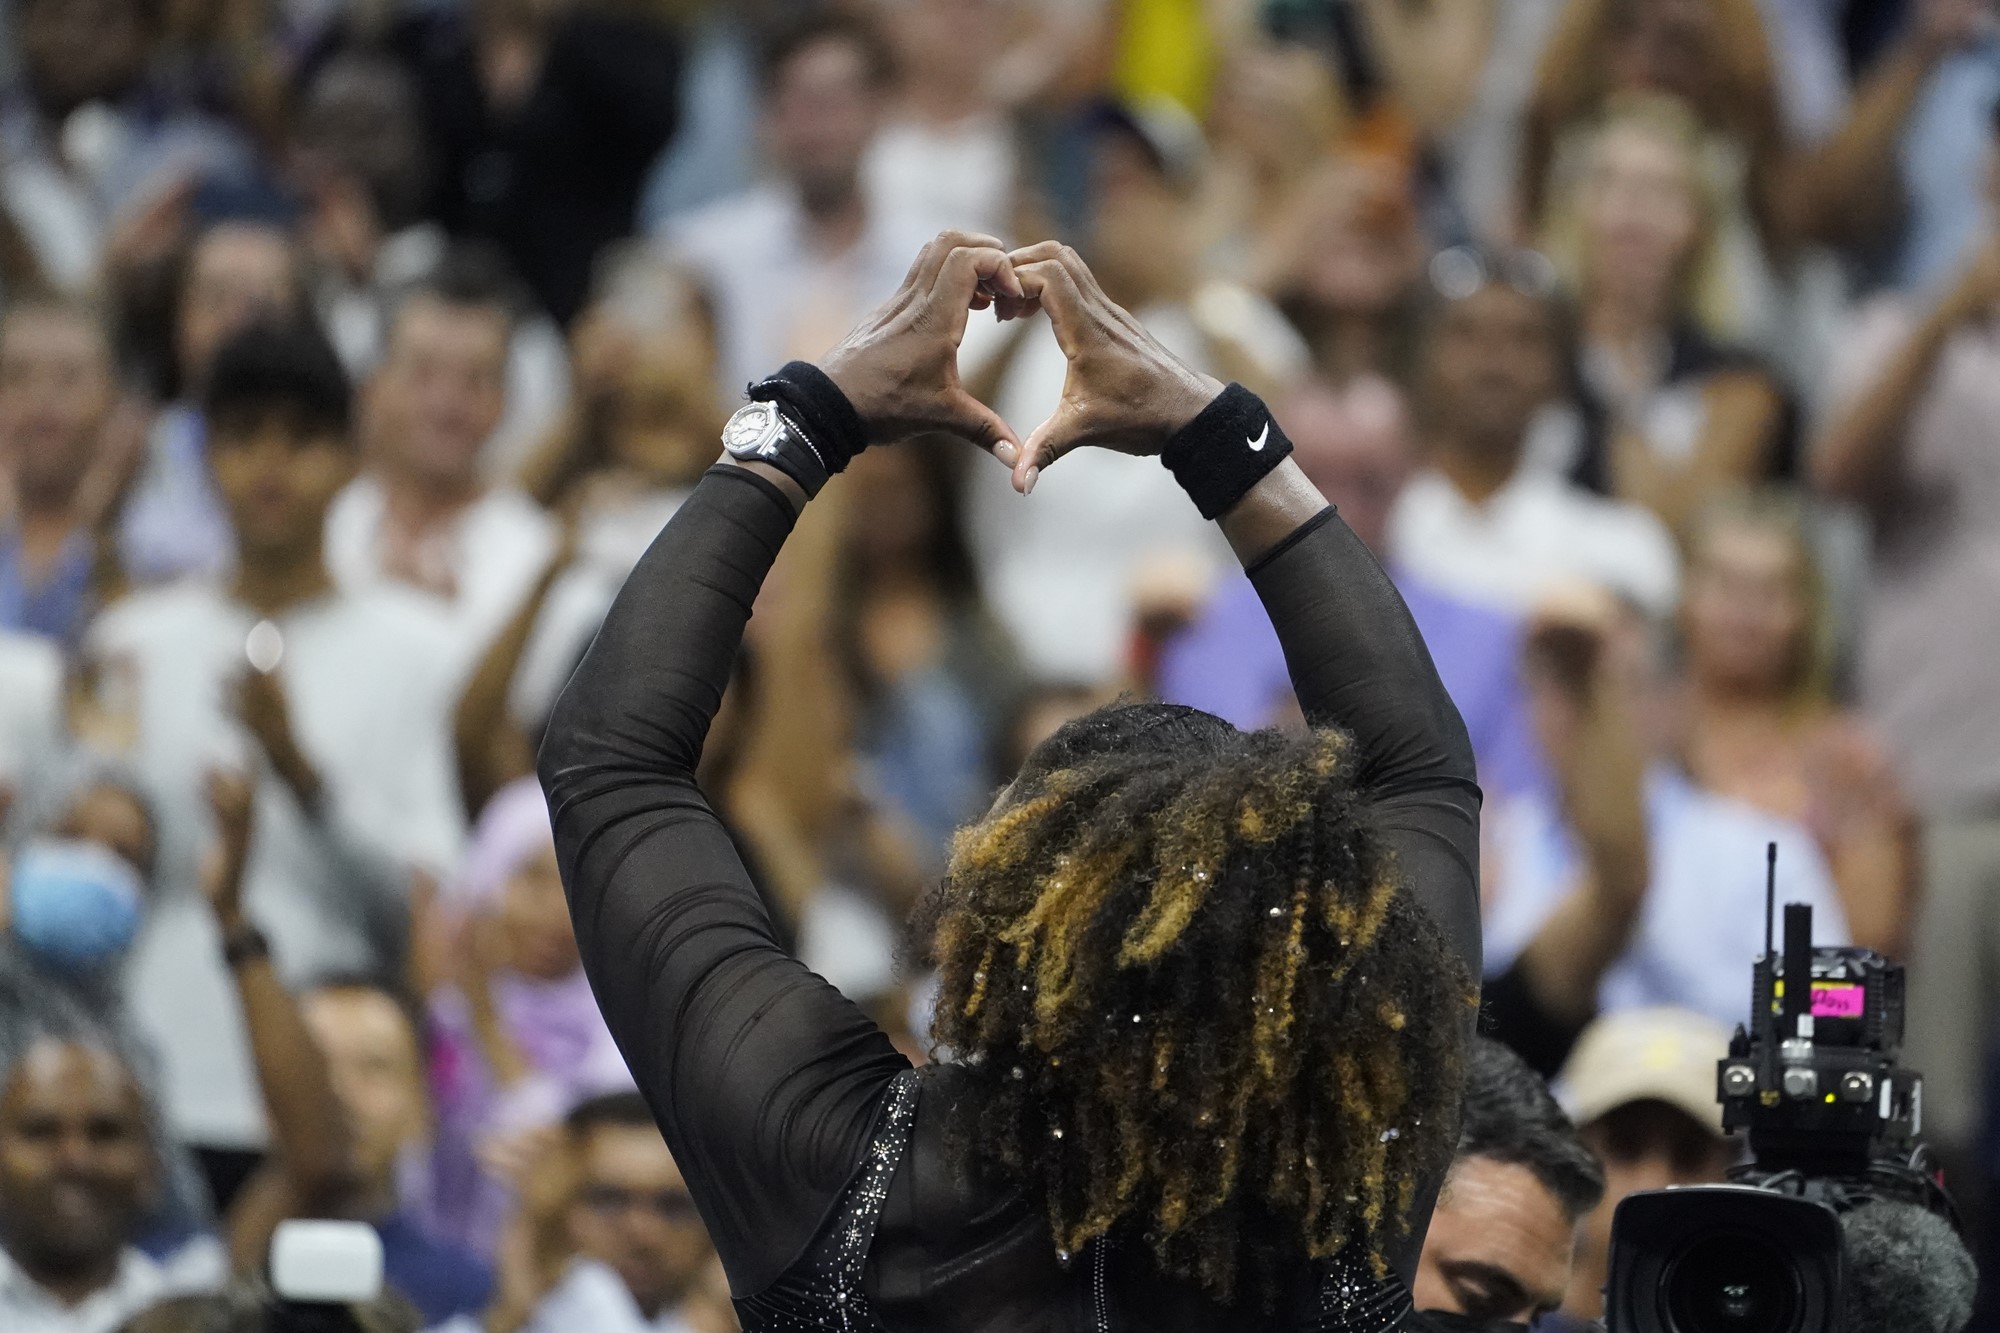 Serena Williams makes a love-heart shape with her hands at the US Open.